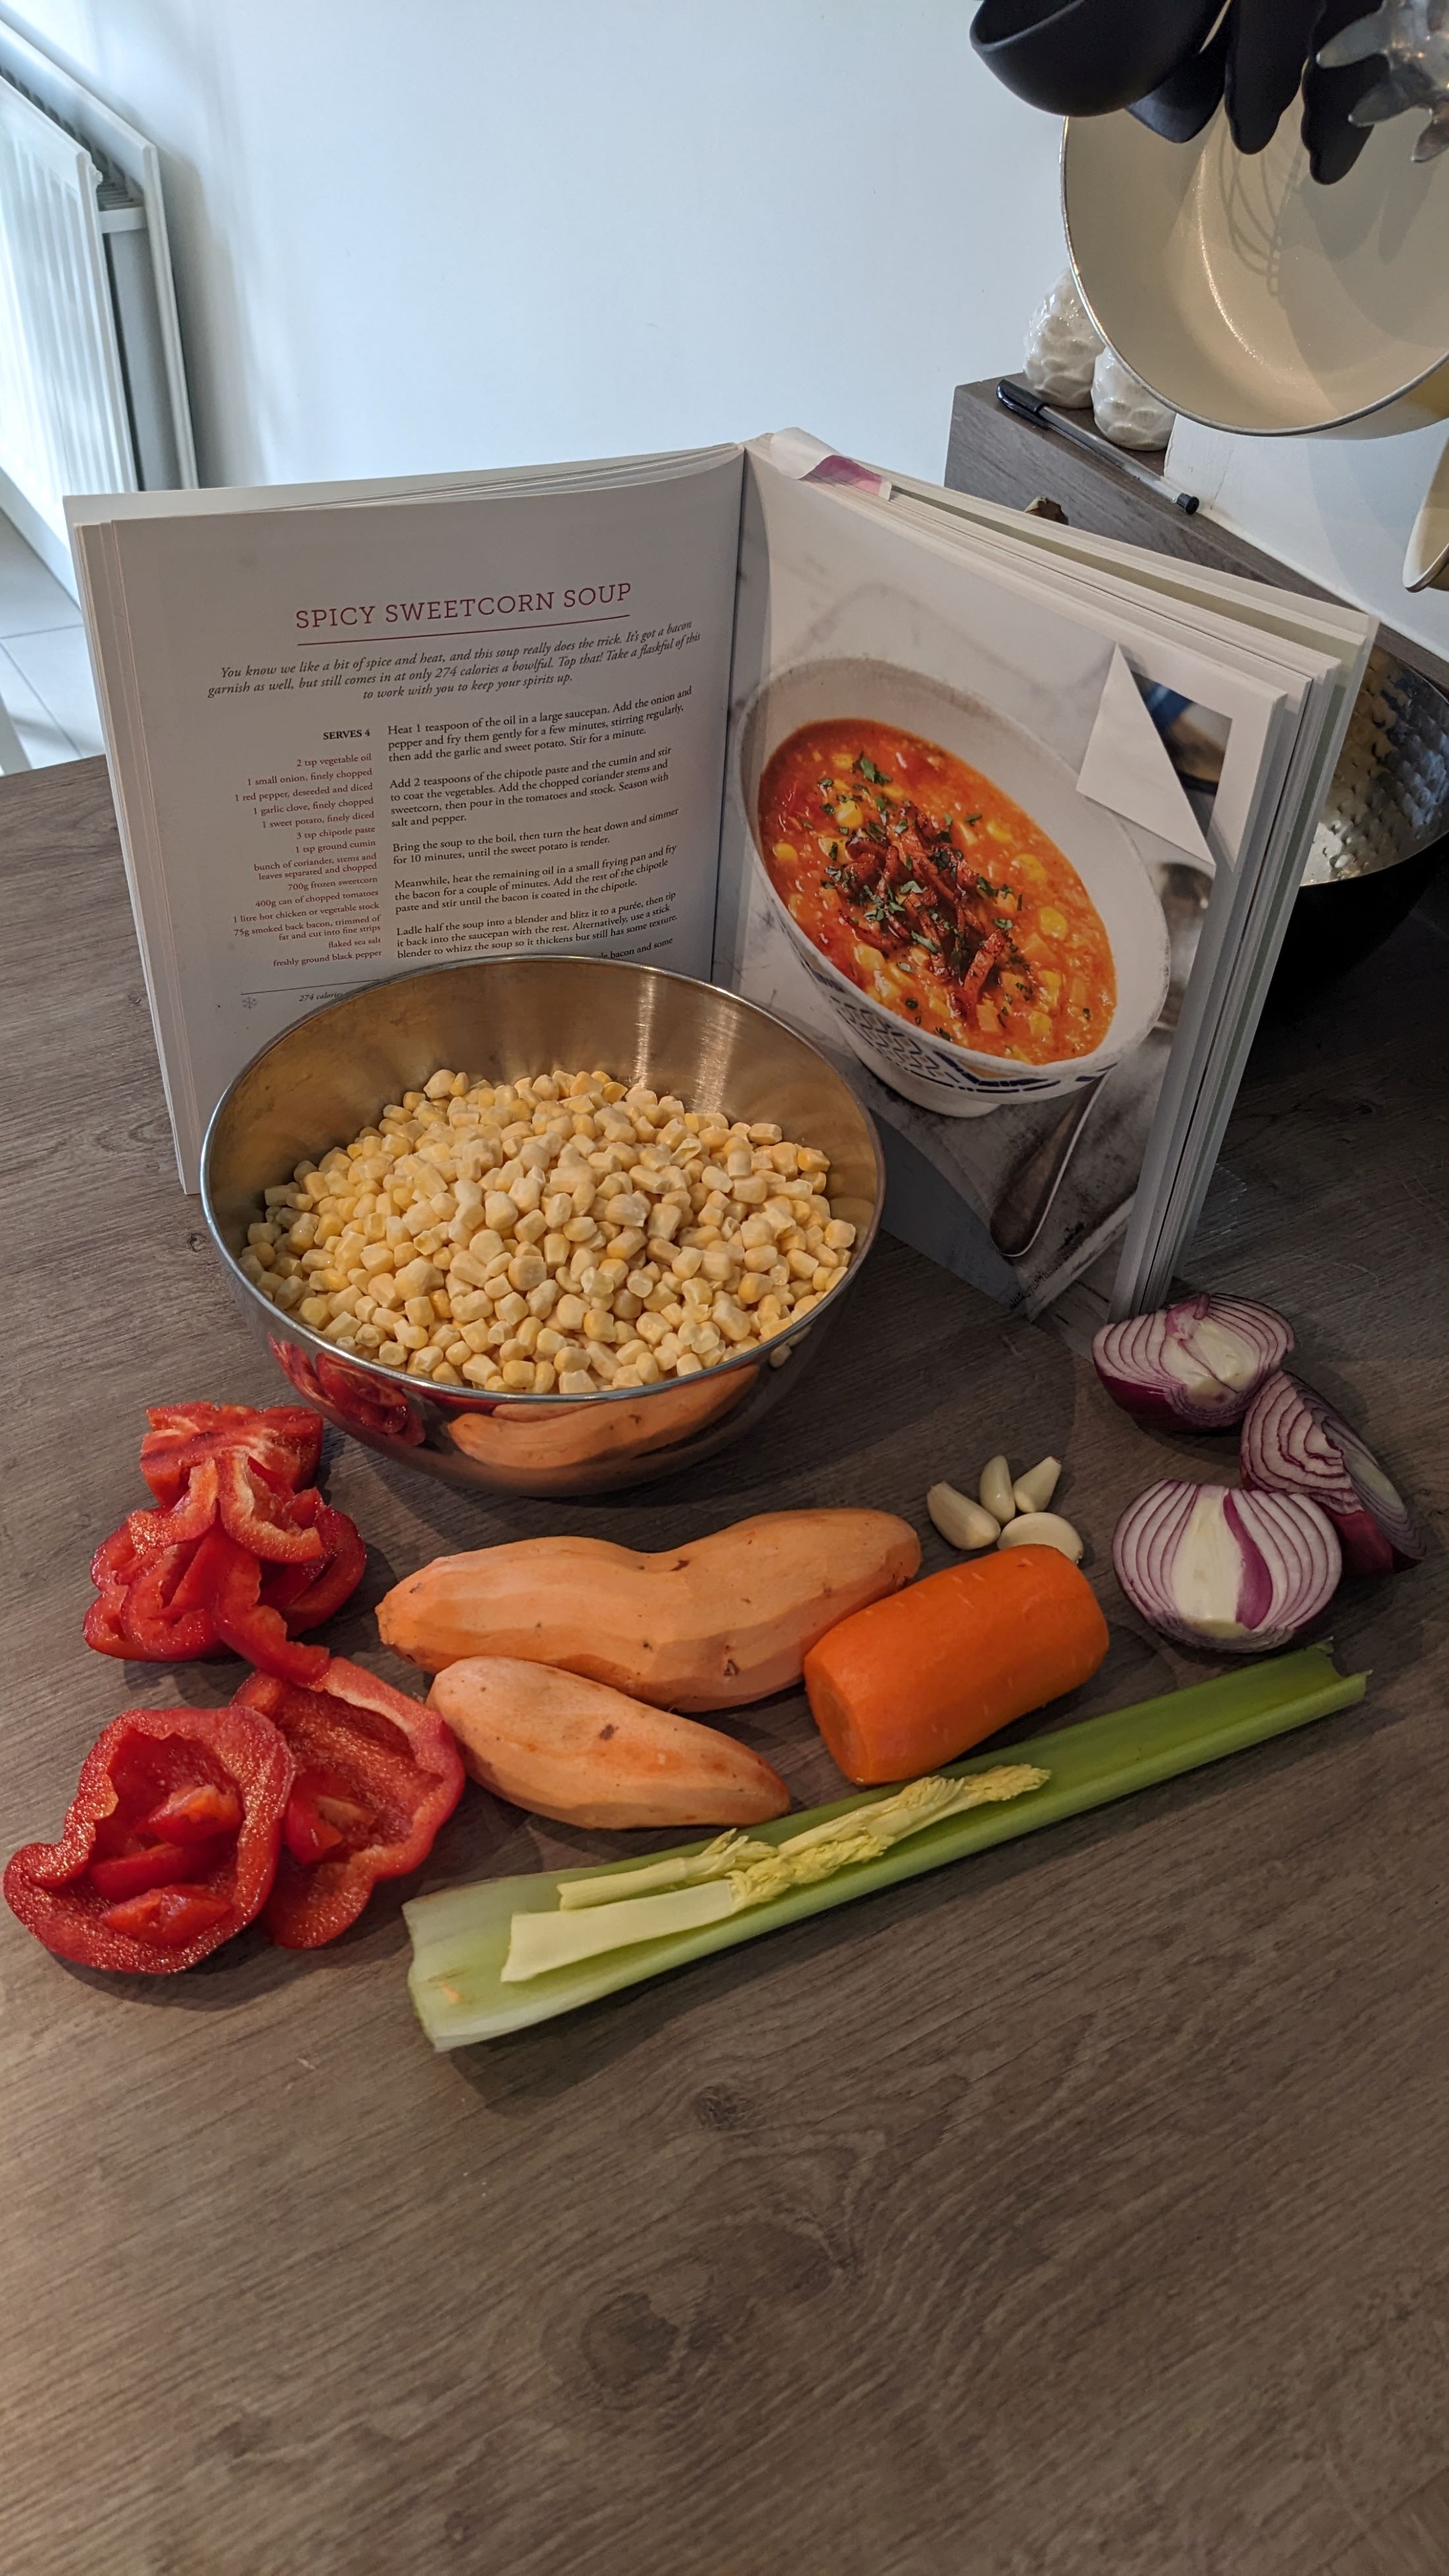 Delicious ingredients for spicy sweetcorn soup.